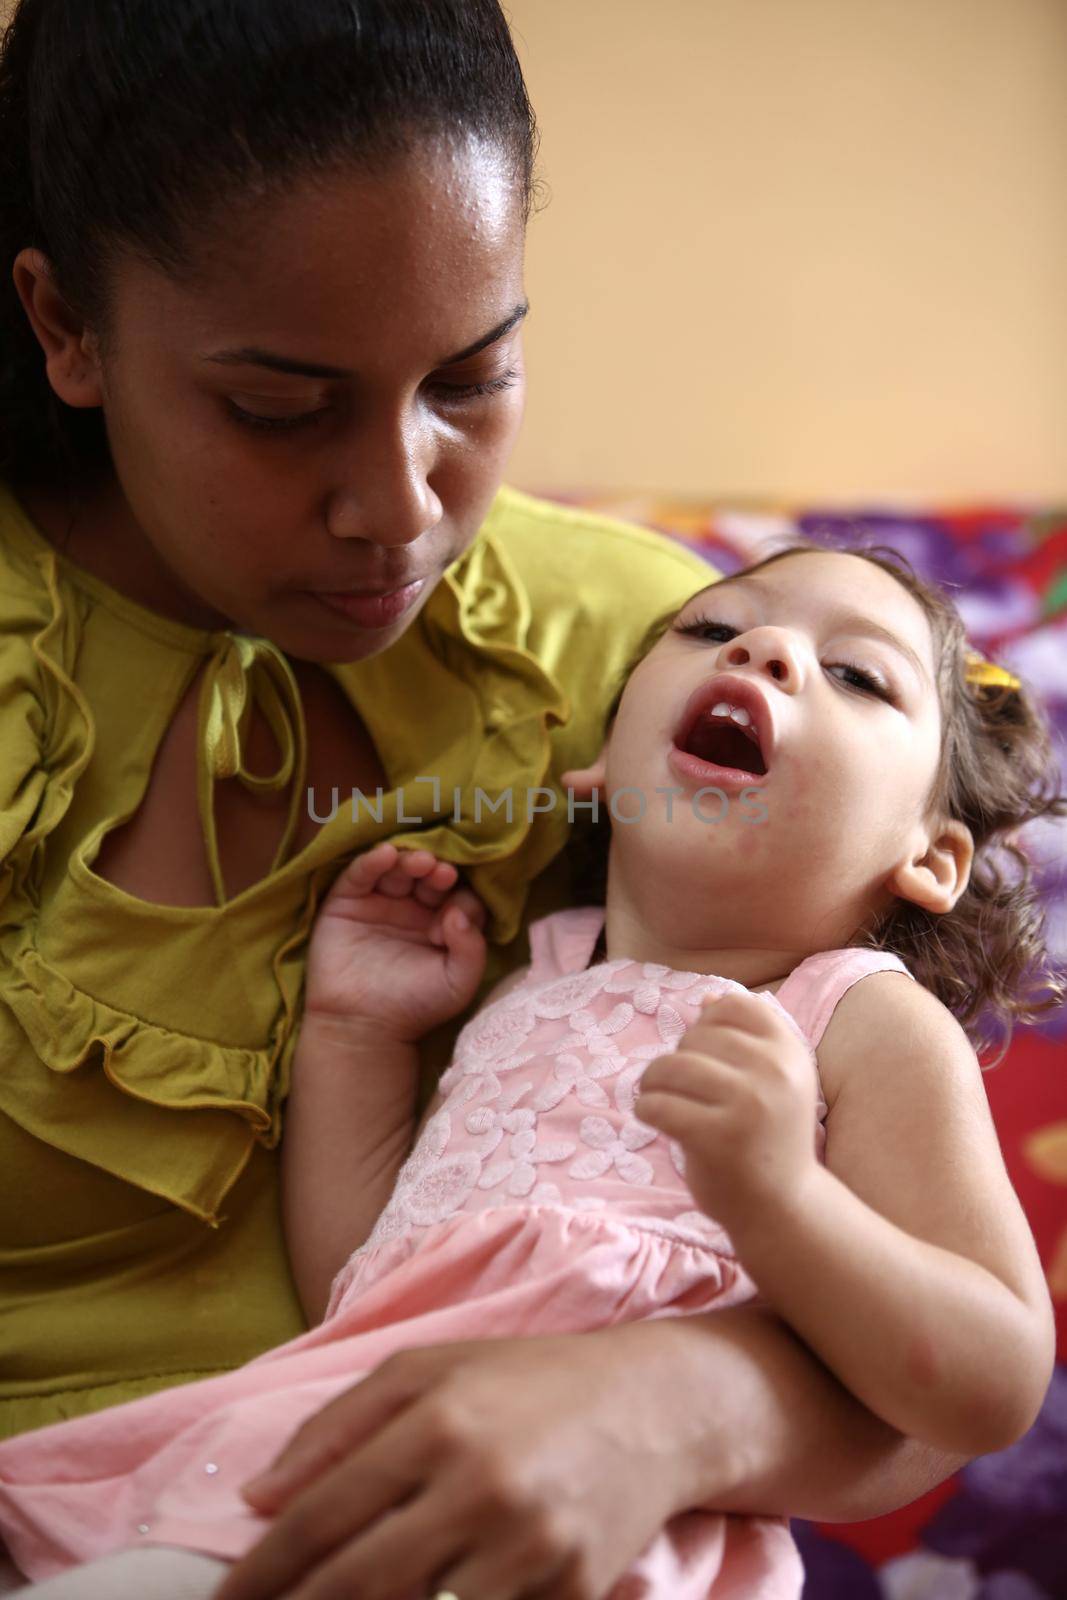 salvador, bahia, brazil - september 27, 2017: mother sucks her daughter with microcephaly caused by zica virus during pregnancy in the city of Salvador.